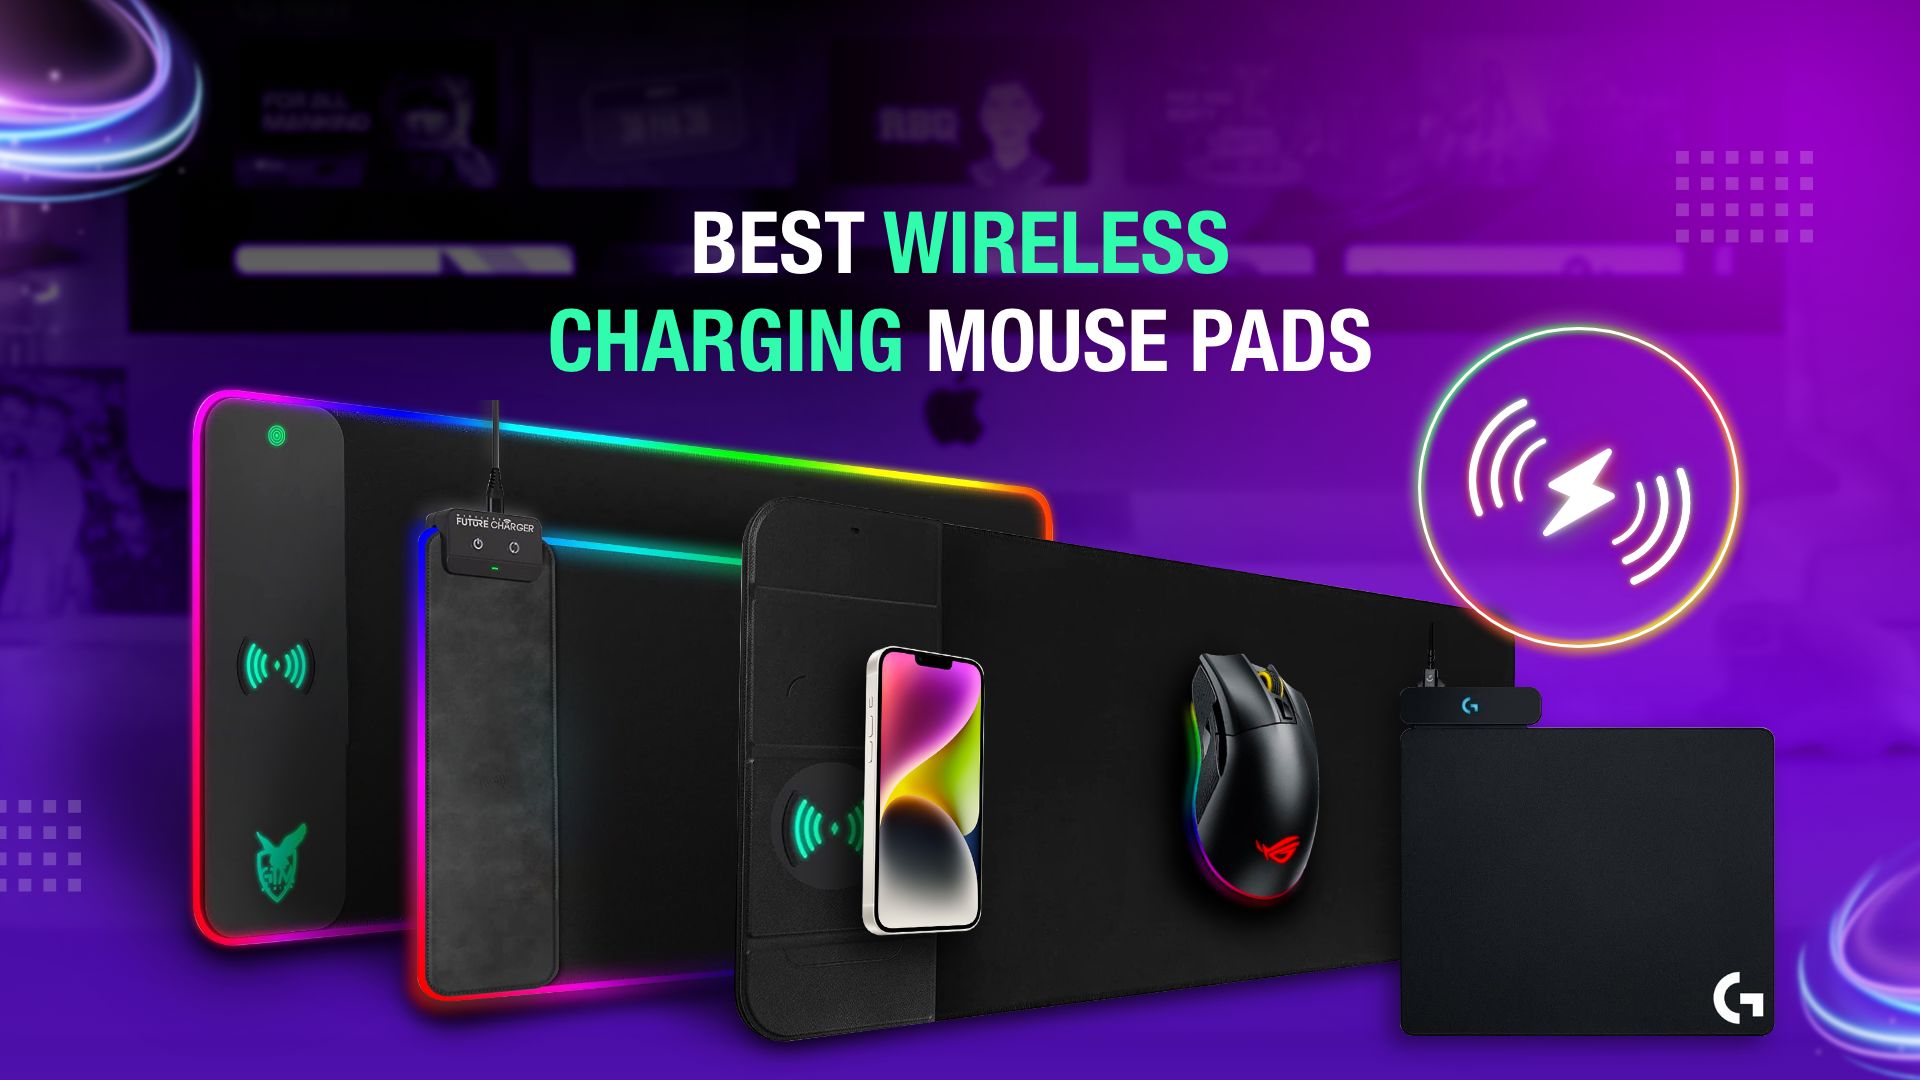 radicaal Moederland overschrijving 12 Best Wireless Charging Mouse Pads in 2023 - Techtouchy